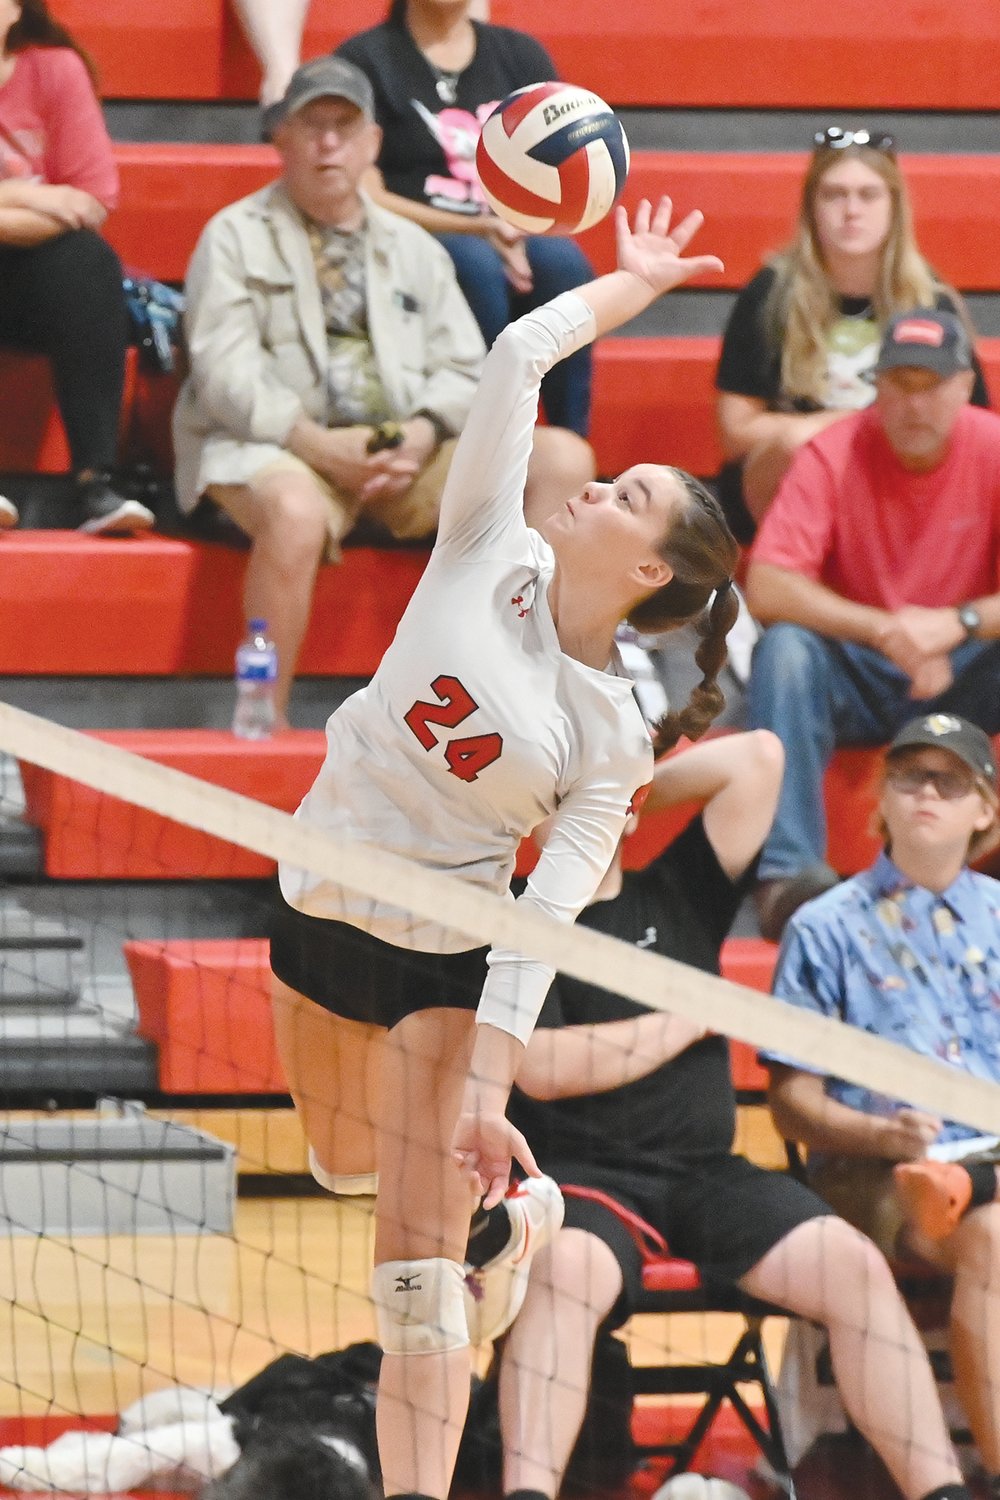 Warrenton's Zoe Klaus goes for a kill in a game earlier this season. The Warriors wrapped up a conference title for the second straight year last week.